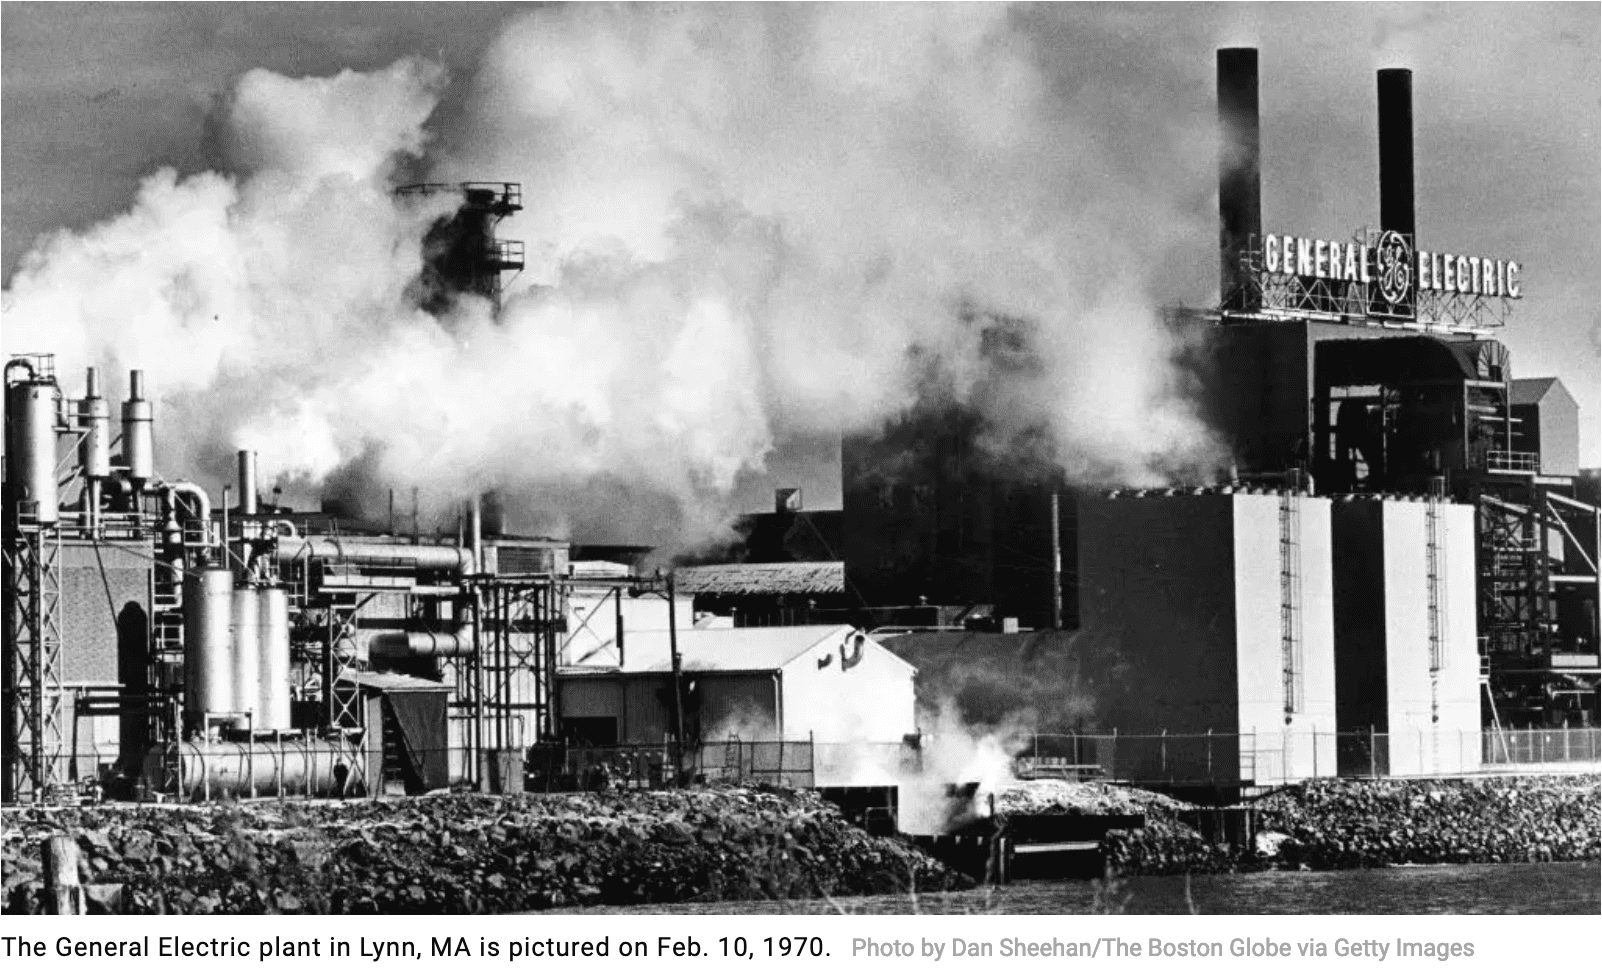 The General Electric plant in Lynn, MA is pictured on Feb. 10, 1970.